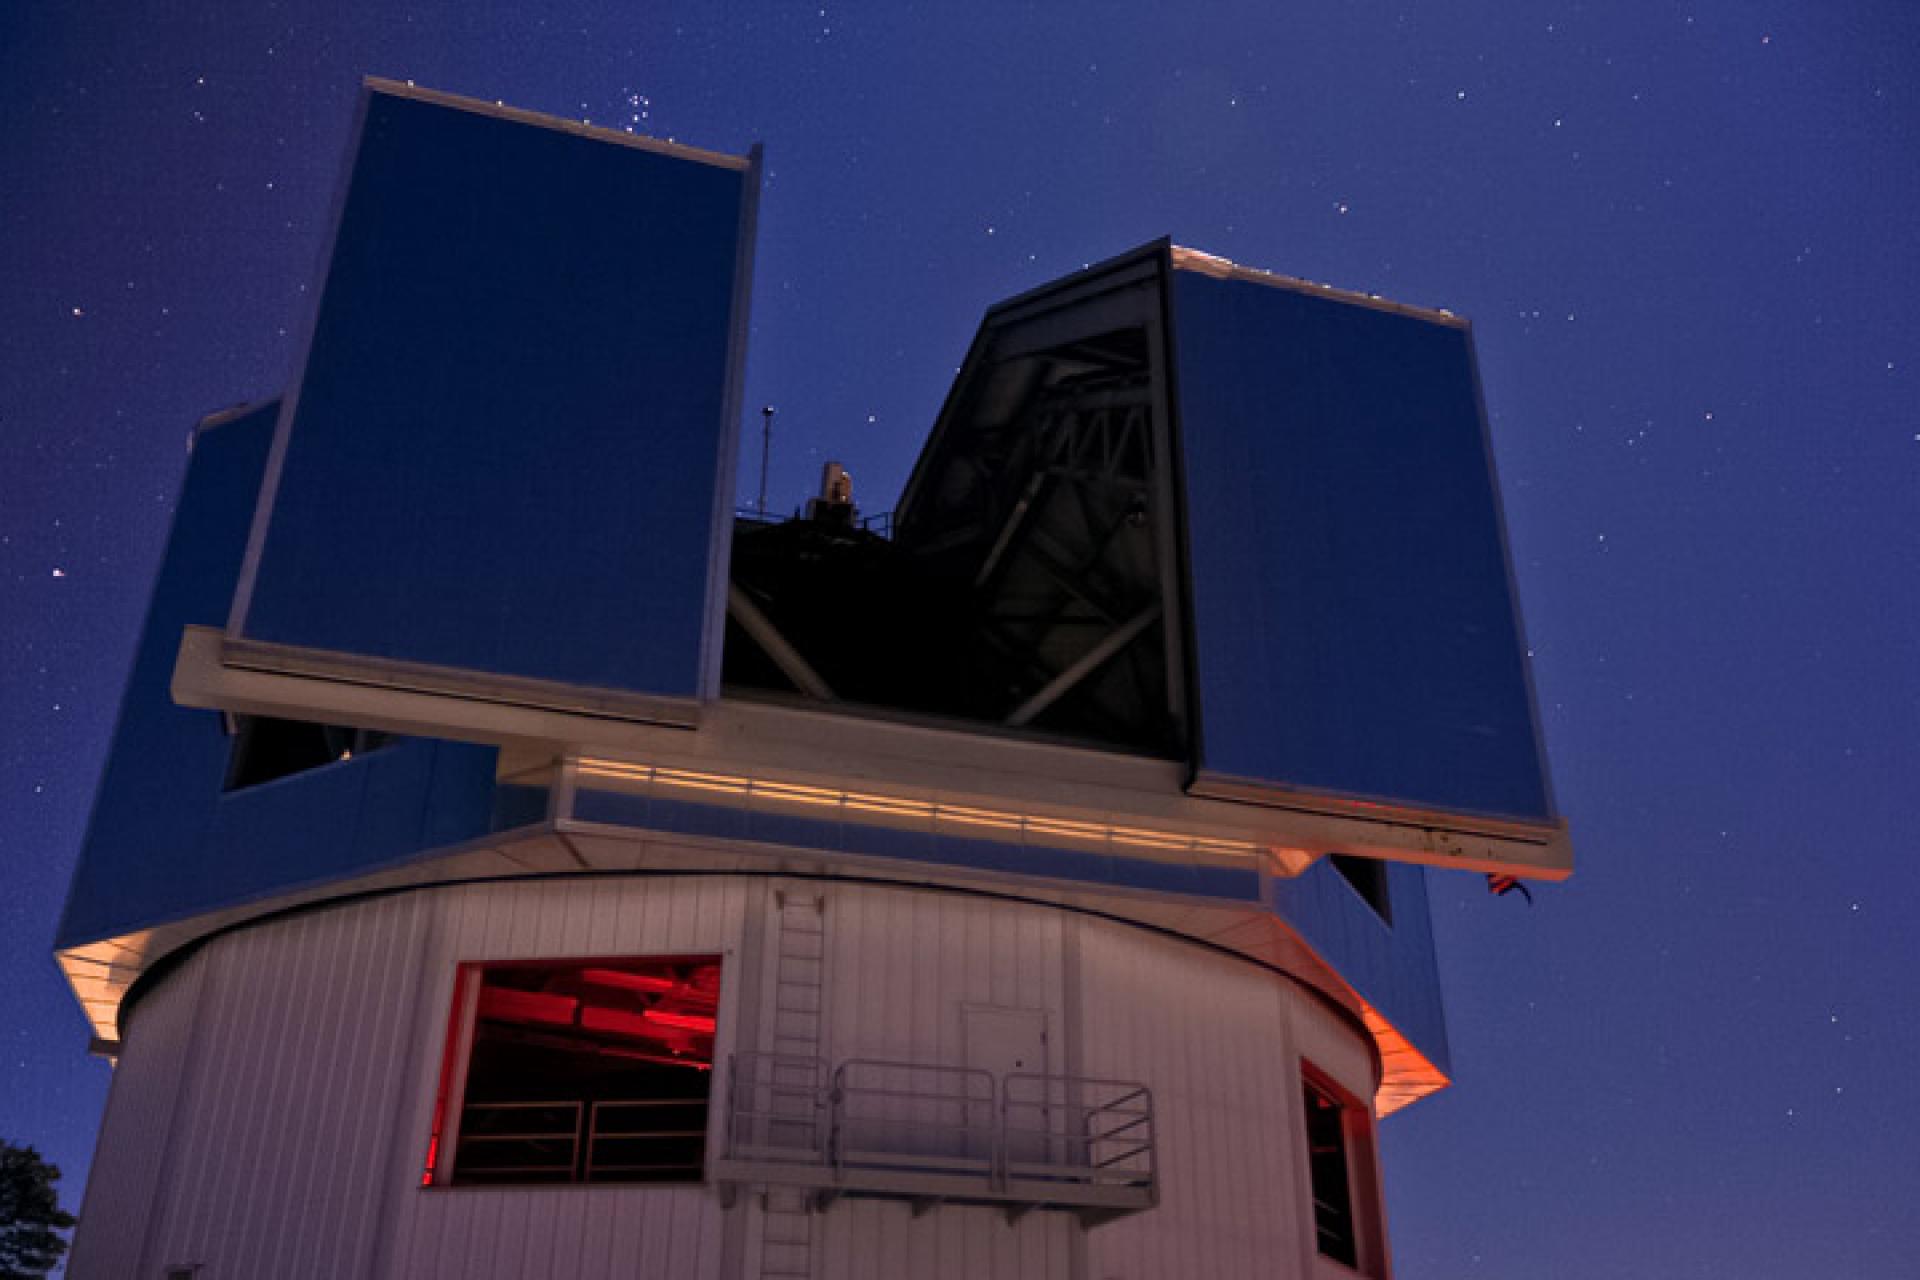 Image of Discovery Telescope at Lowell Observatory in Arizona.